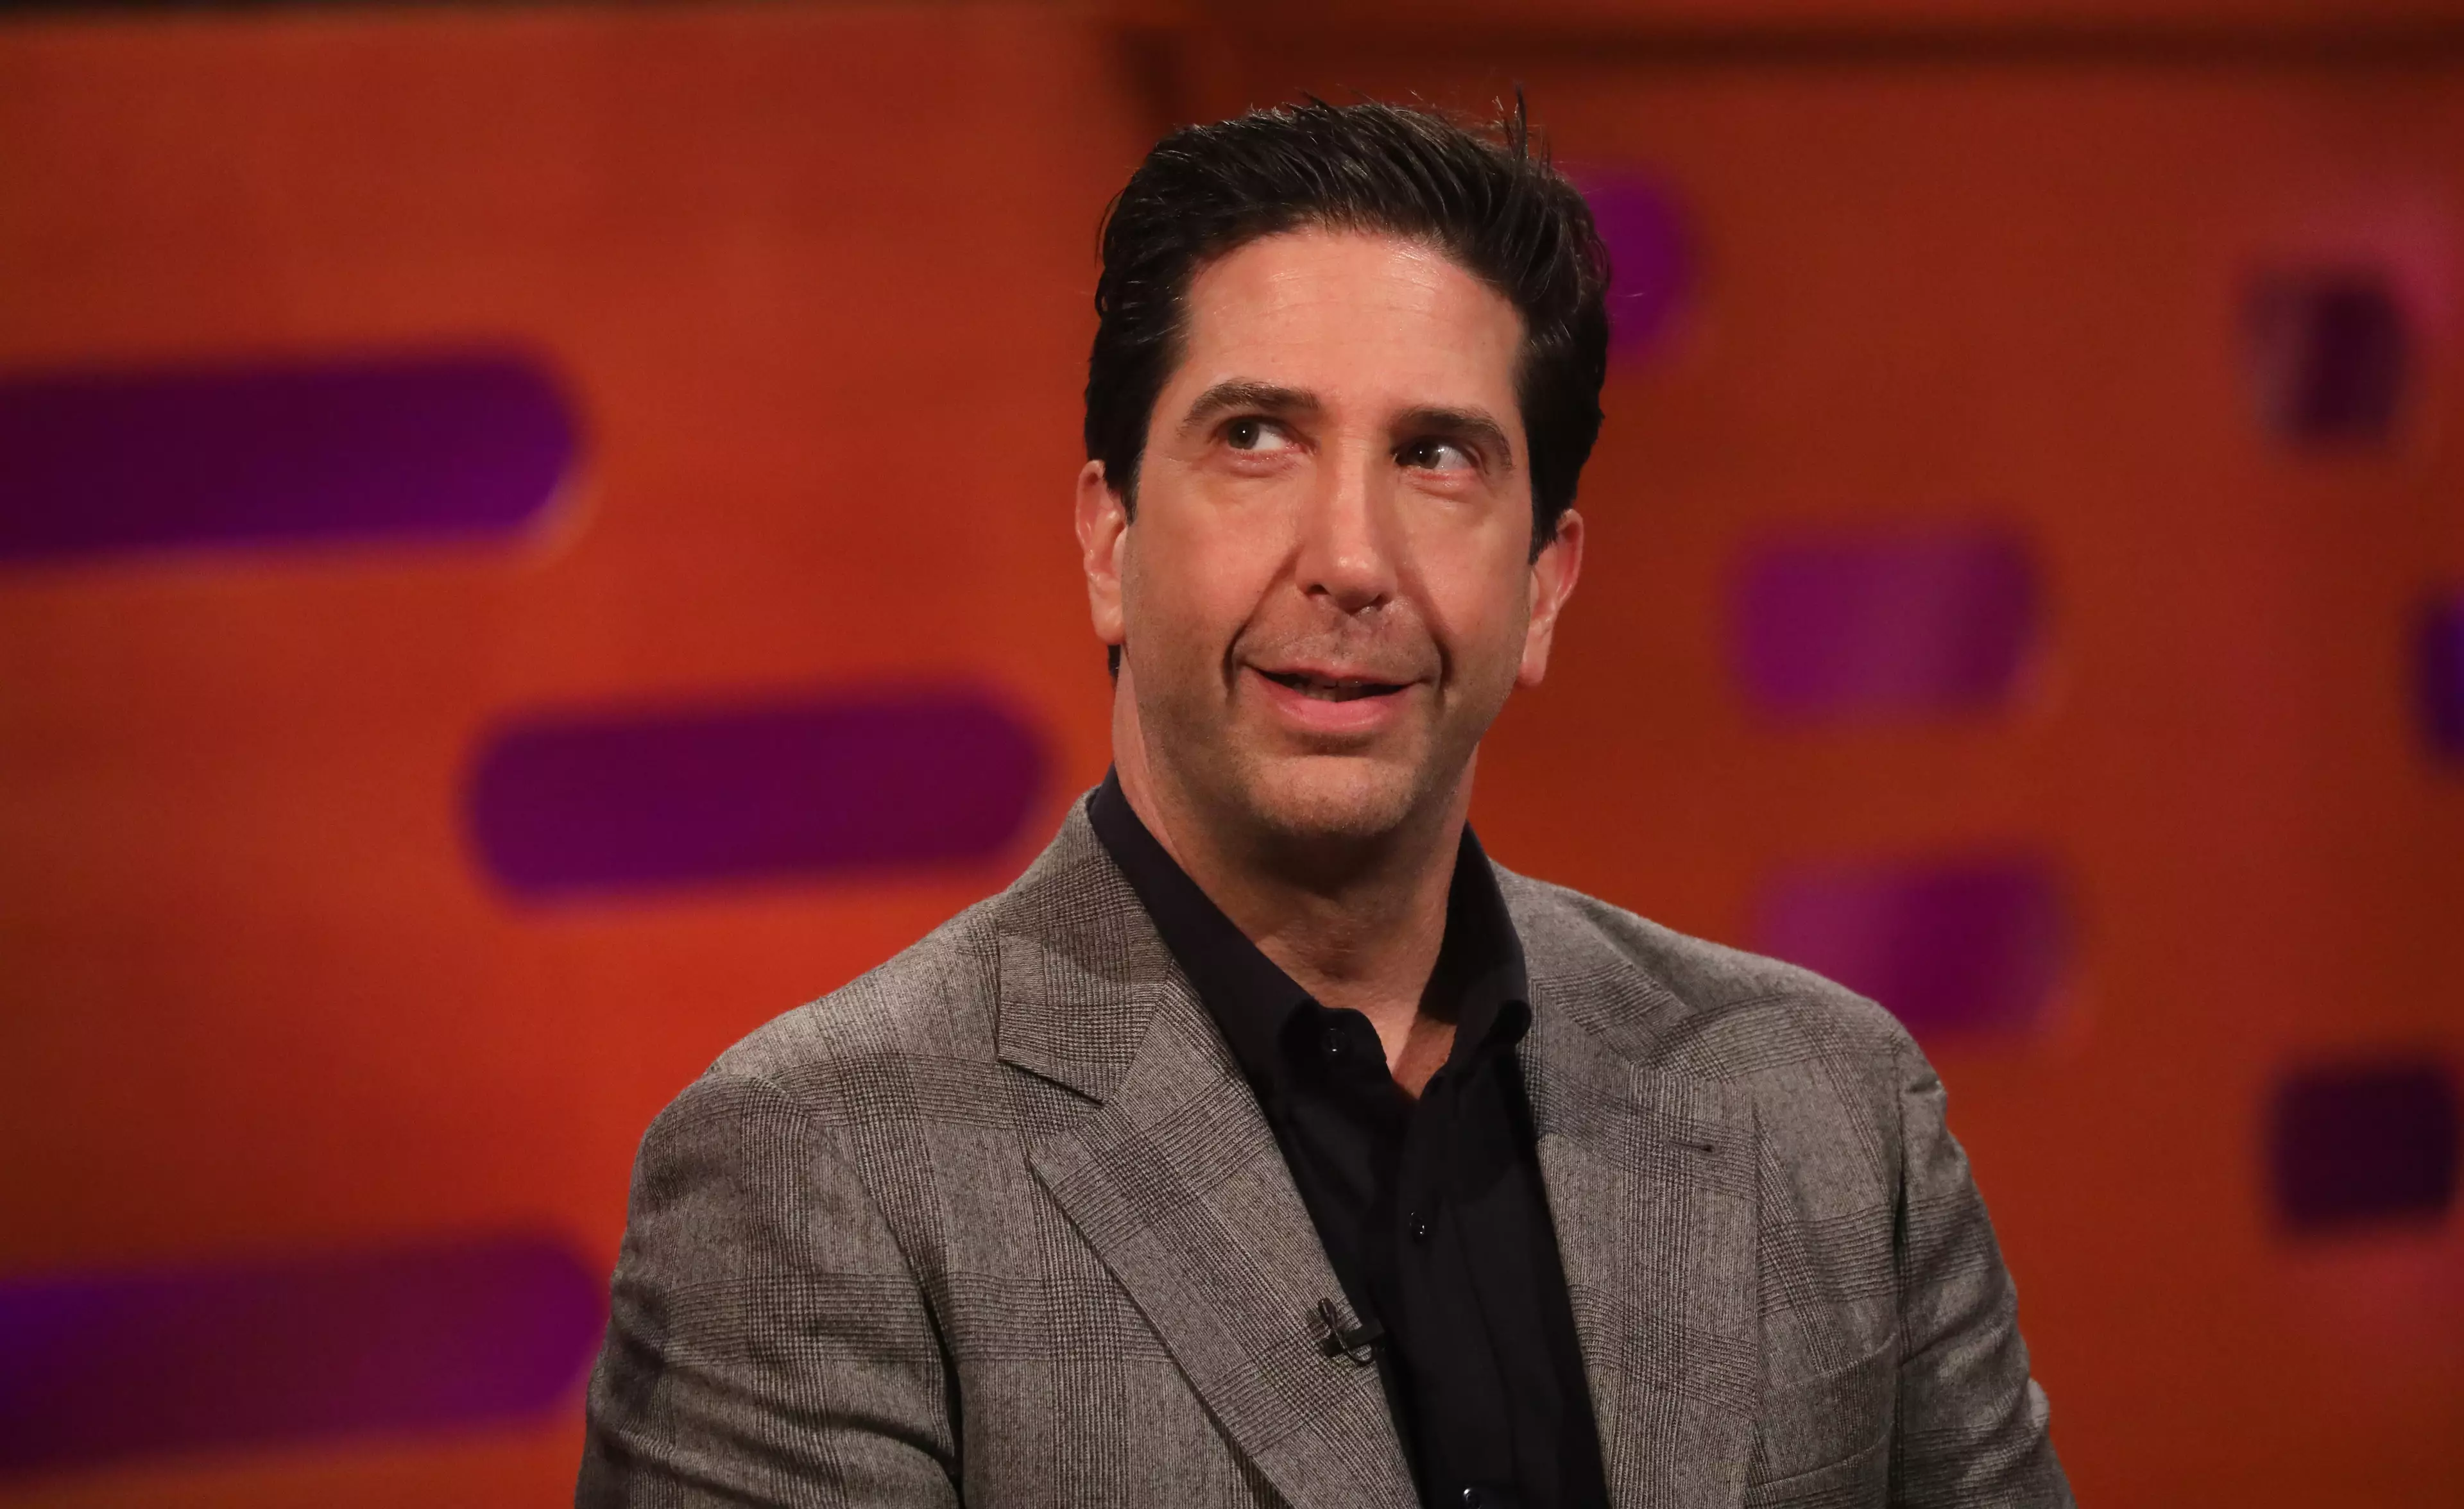 David Schwimmer has revealed the Friends reunion is about to start shooting (